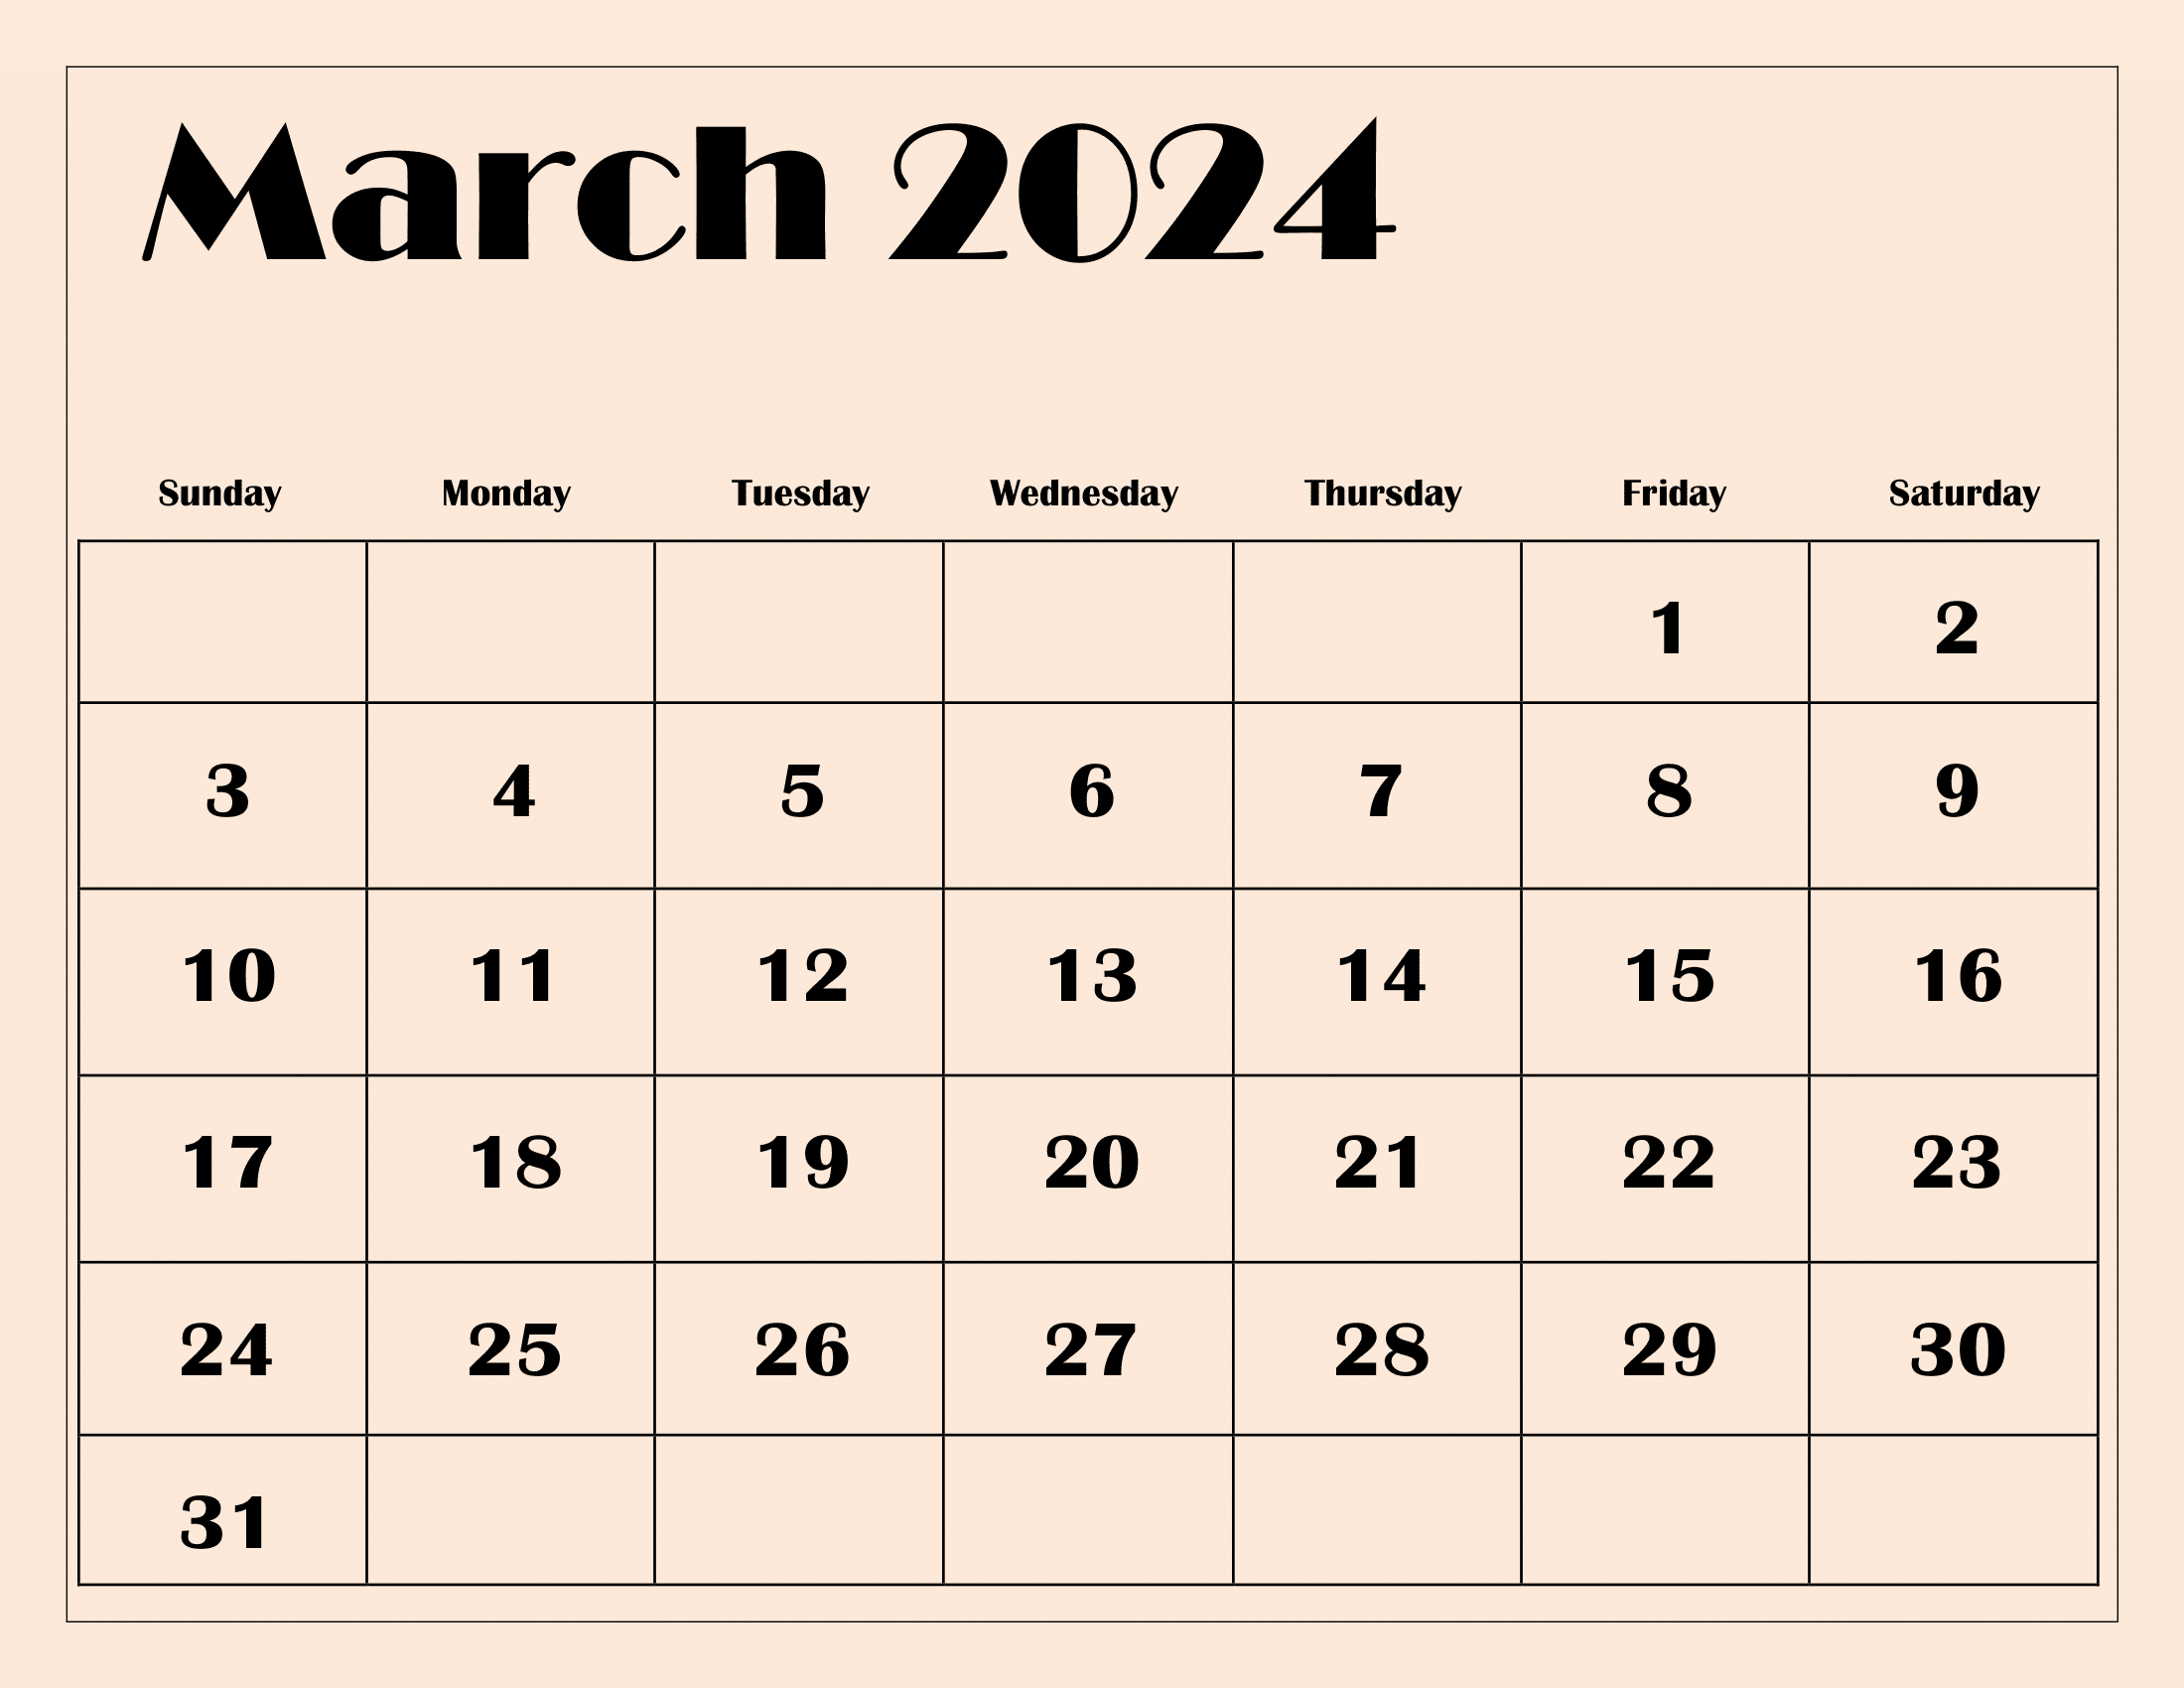 Get Organized with a Free Printable March 2024 Calendar